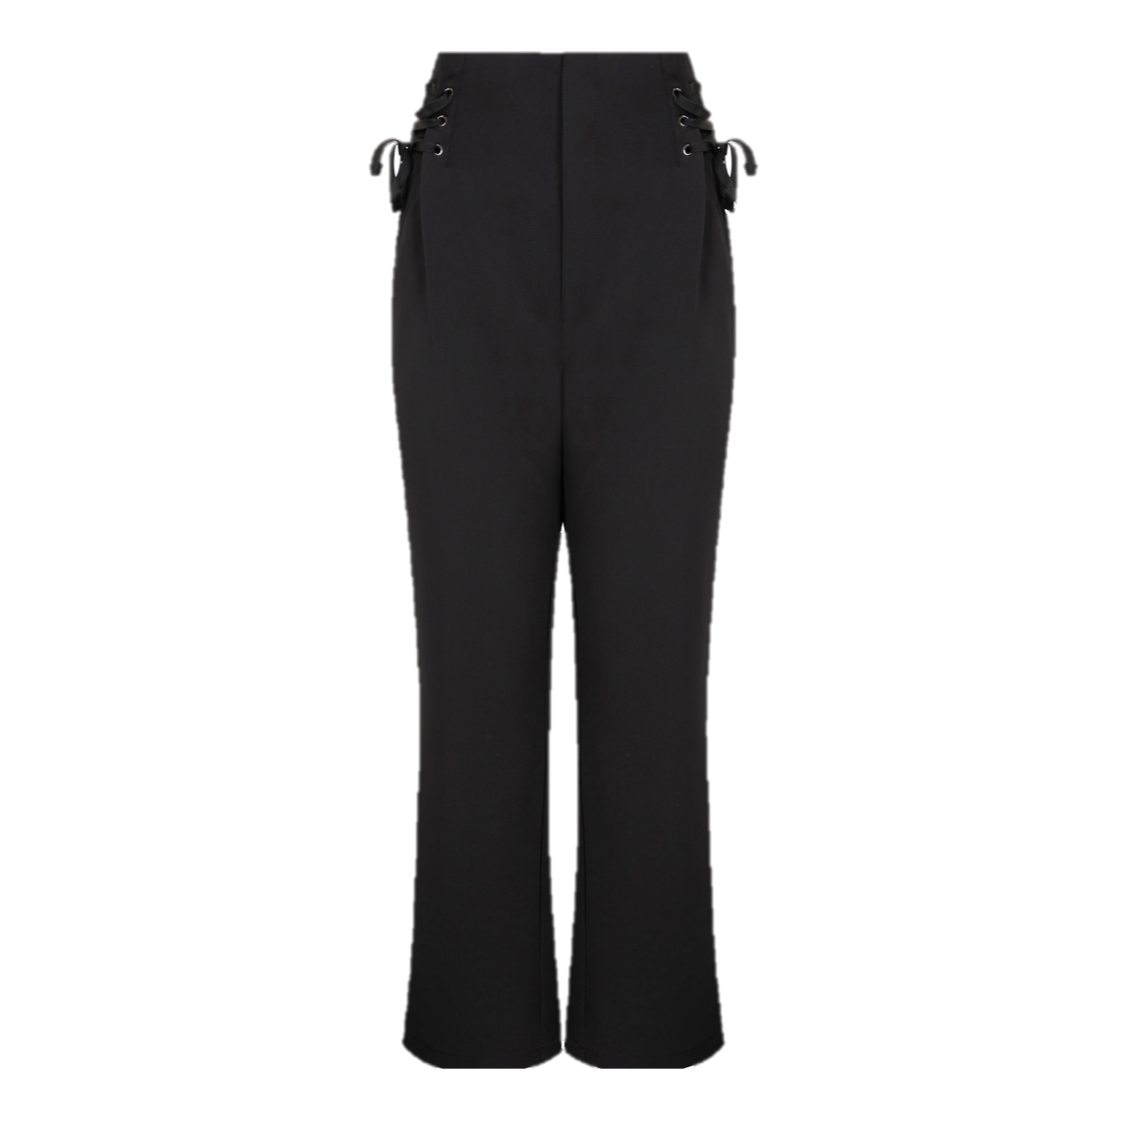 Black High Waisted Trousers